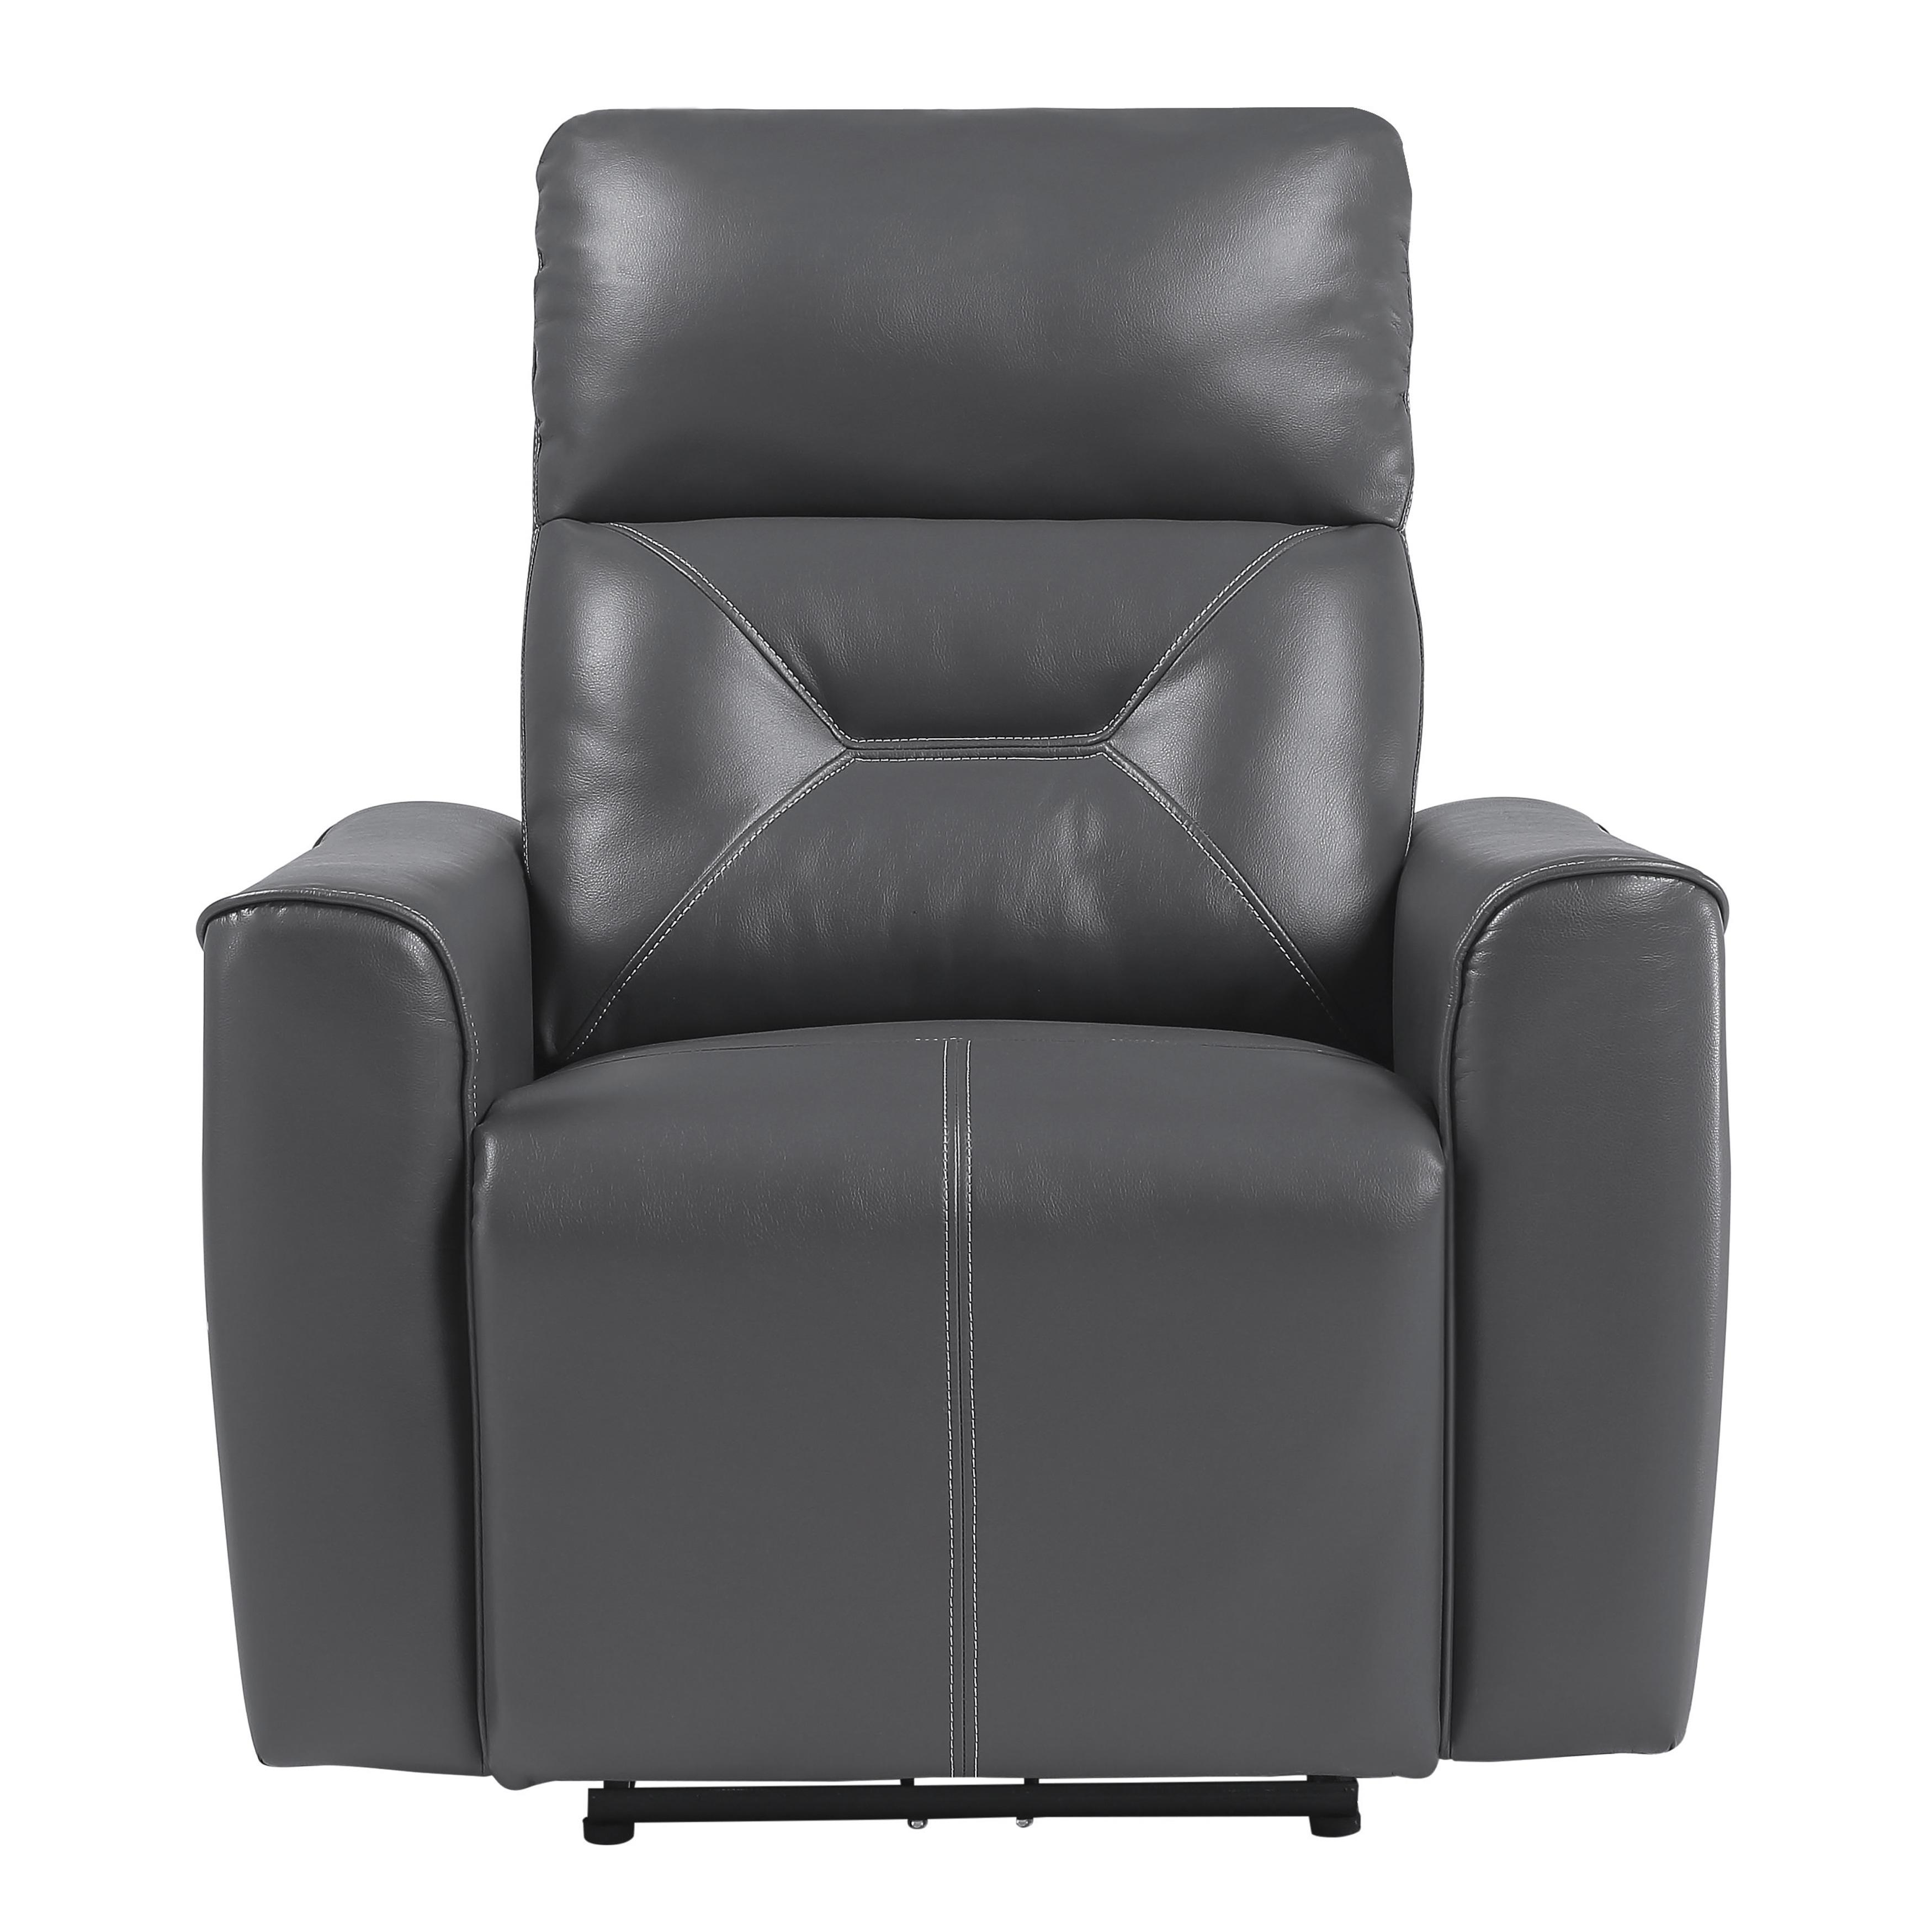 Modern Power Reclining Chair 9446GY-1PW Burwell 9446GY-1PW in Dark Gray Faux Leather